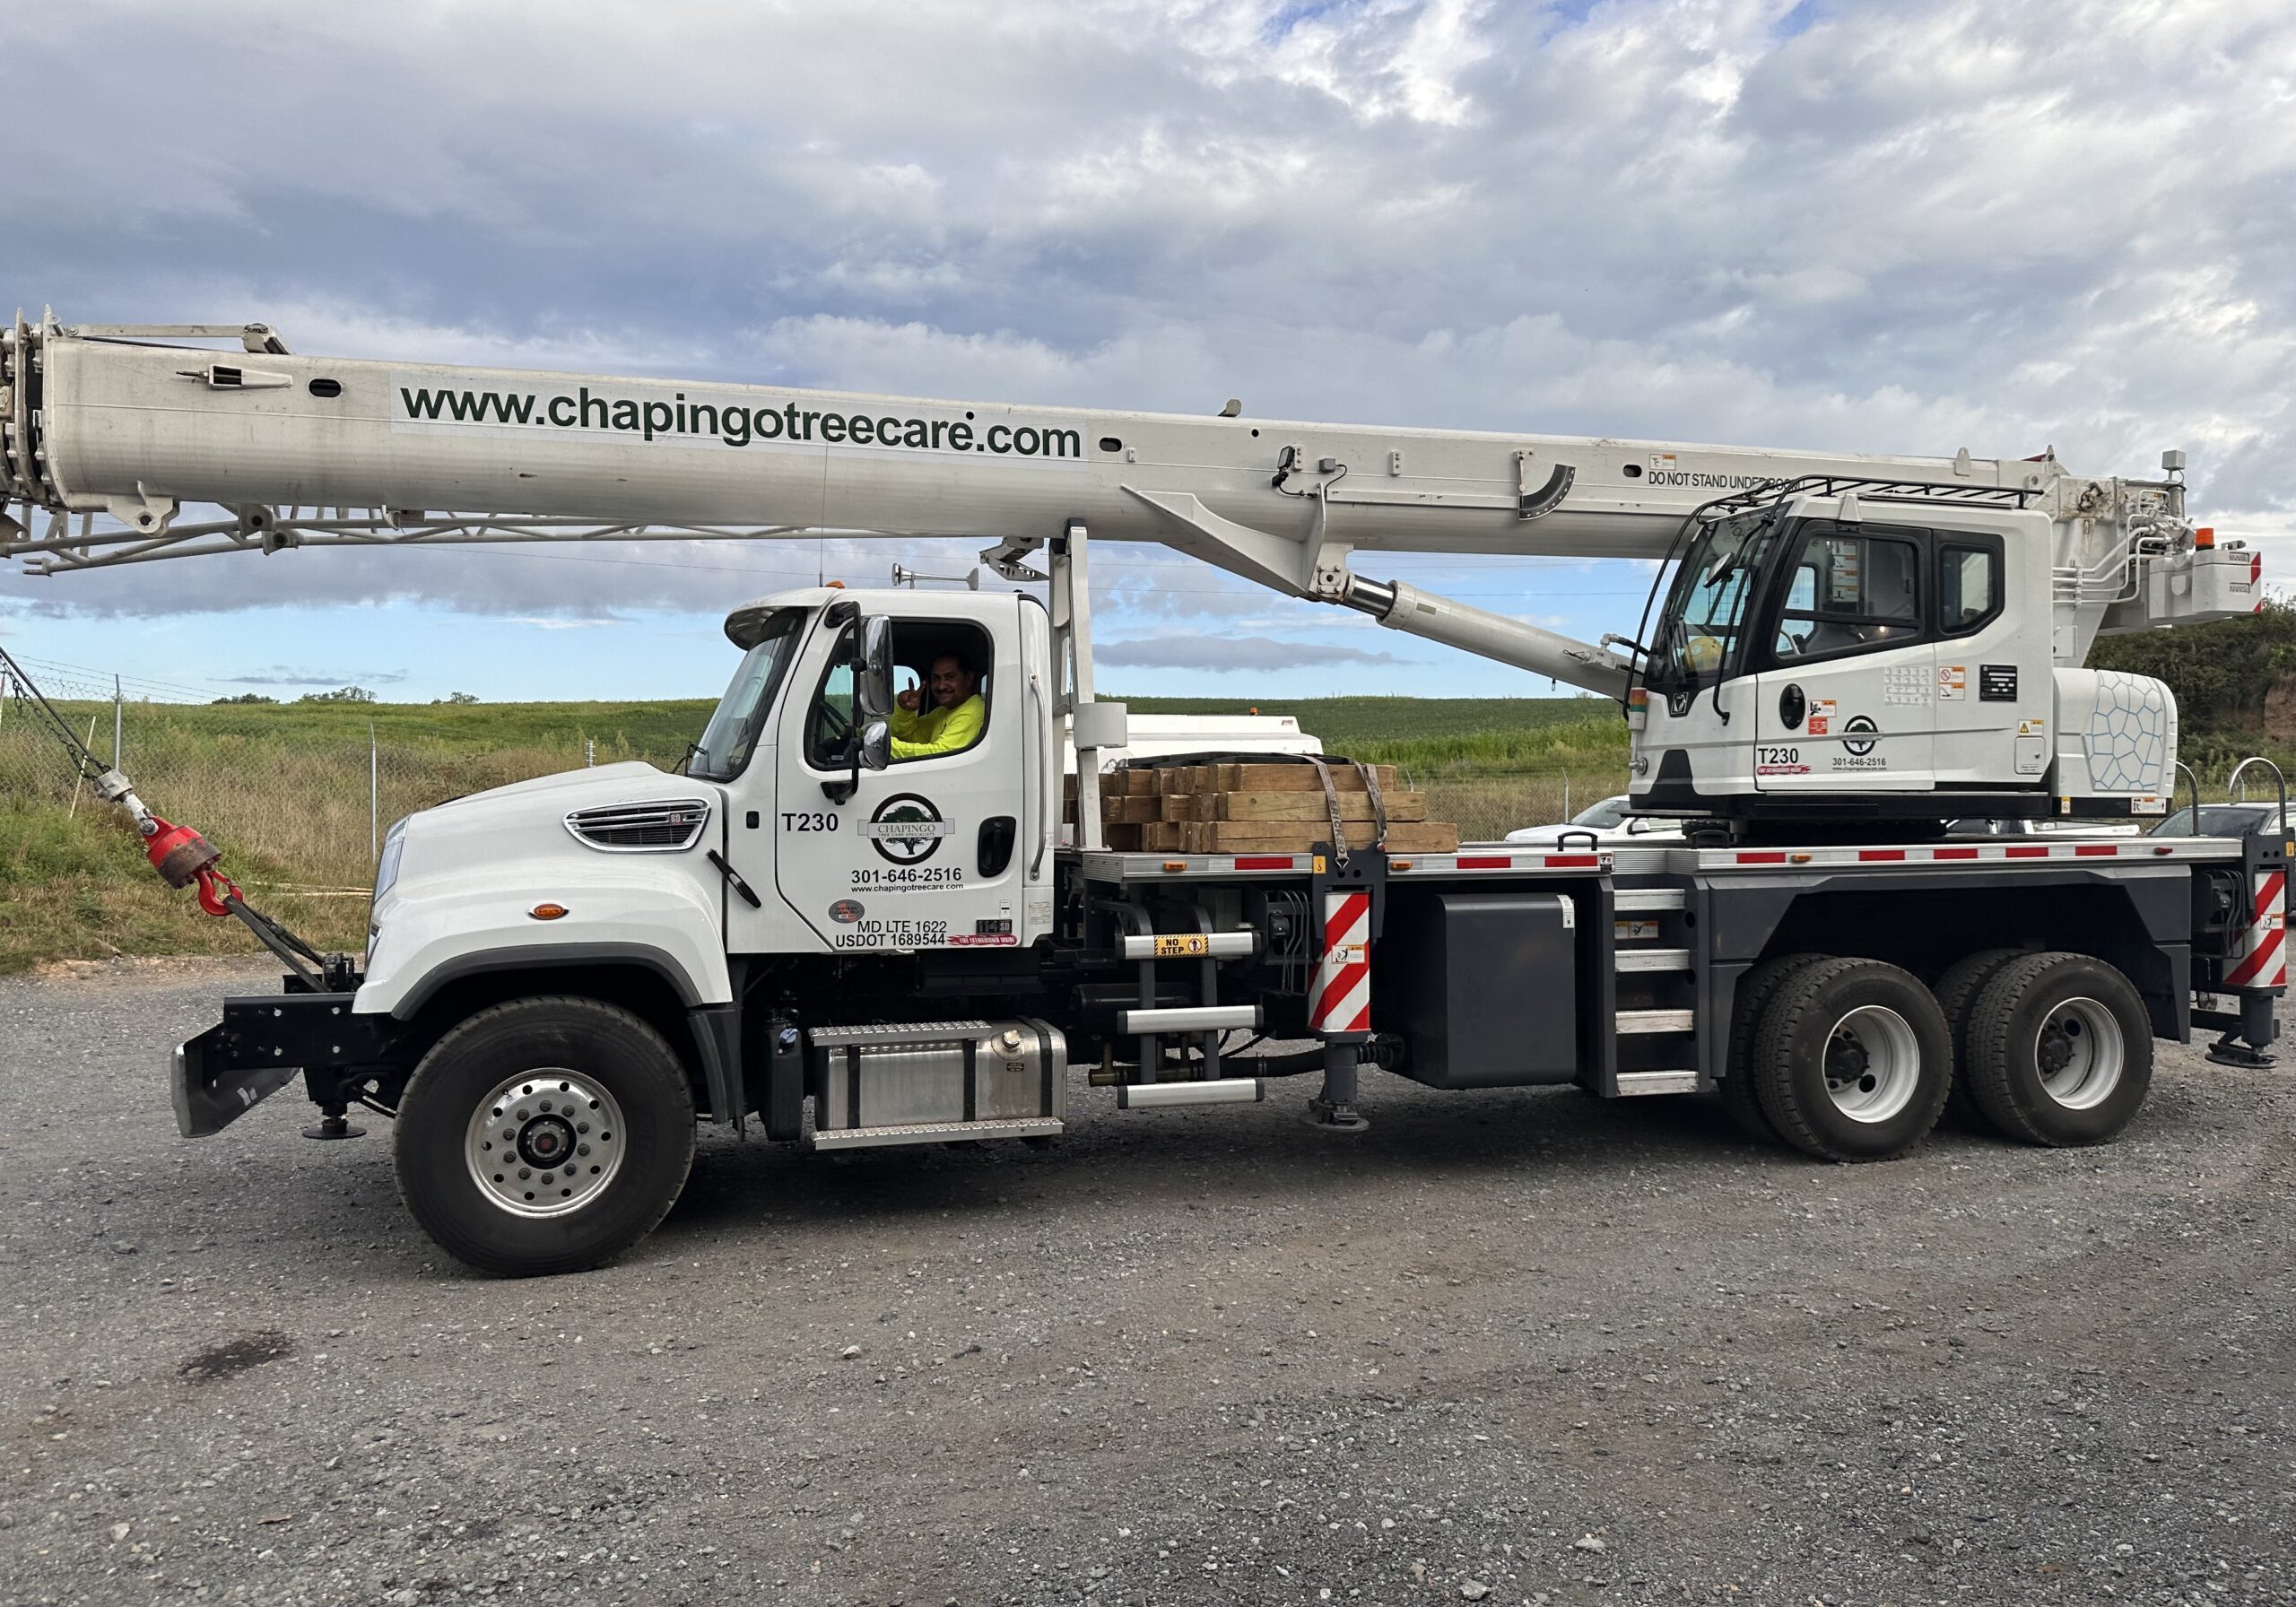 Chapingo Tree Care Specialists. Proudly serving the Washington DC metro area.